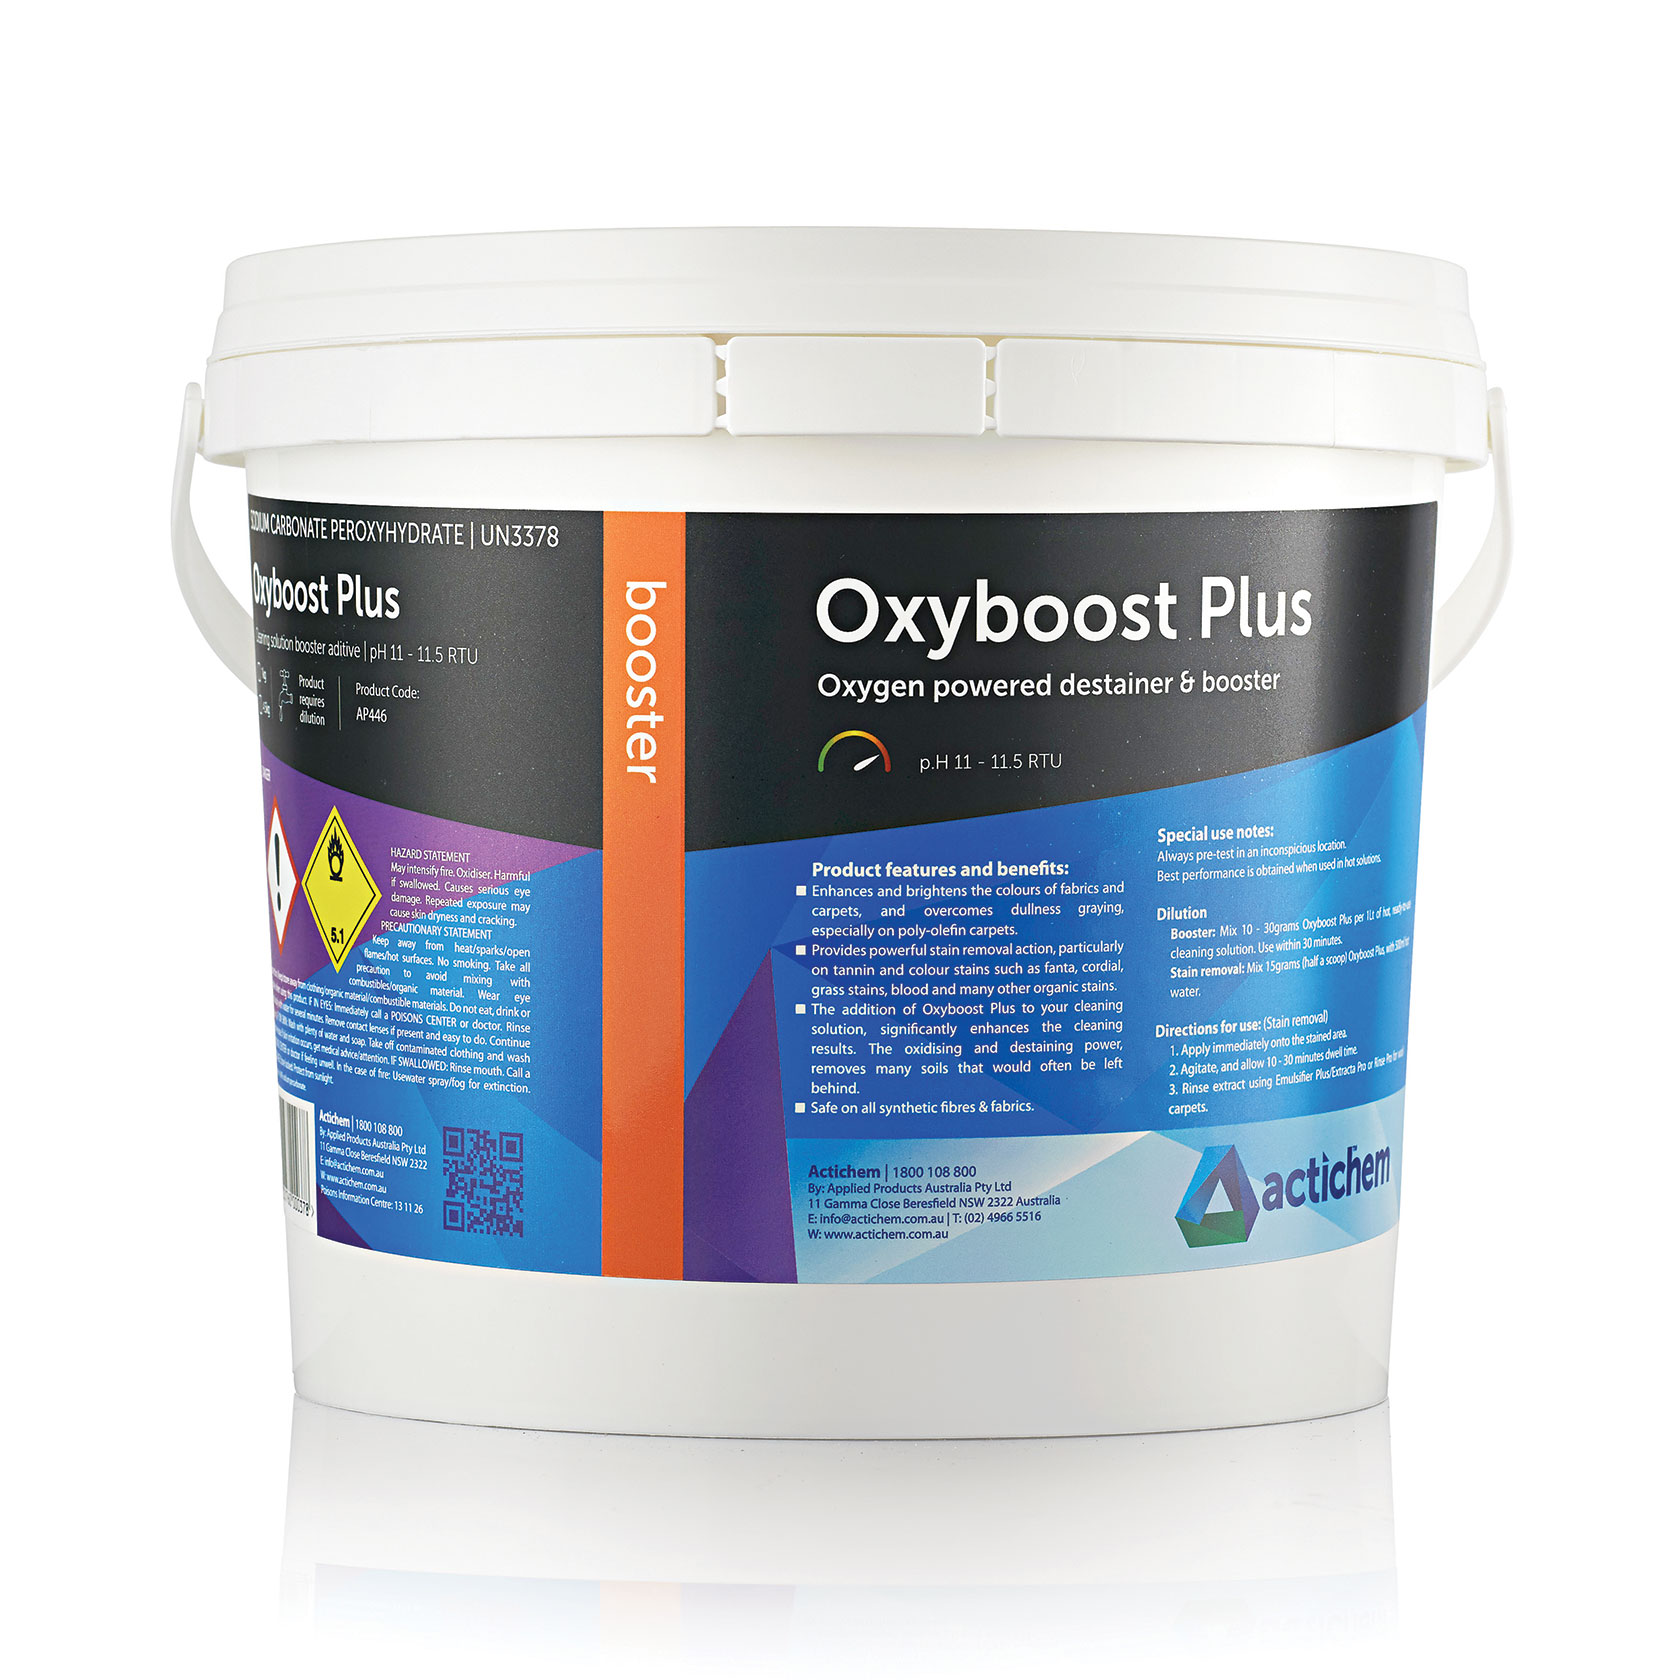 Actichem Oxyboost Plus Oxygenated additive for destaining, cleaning & deodorising